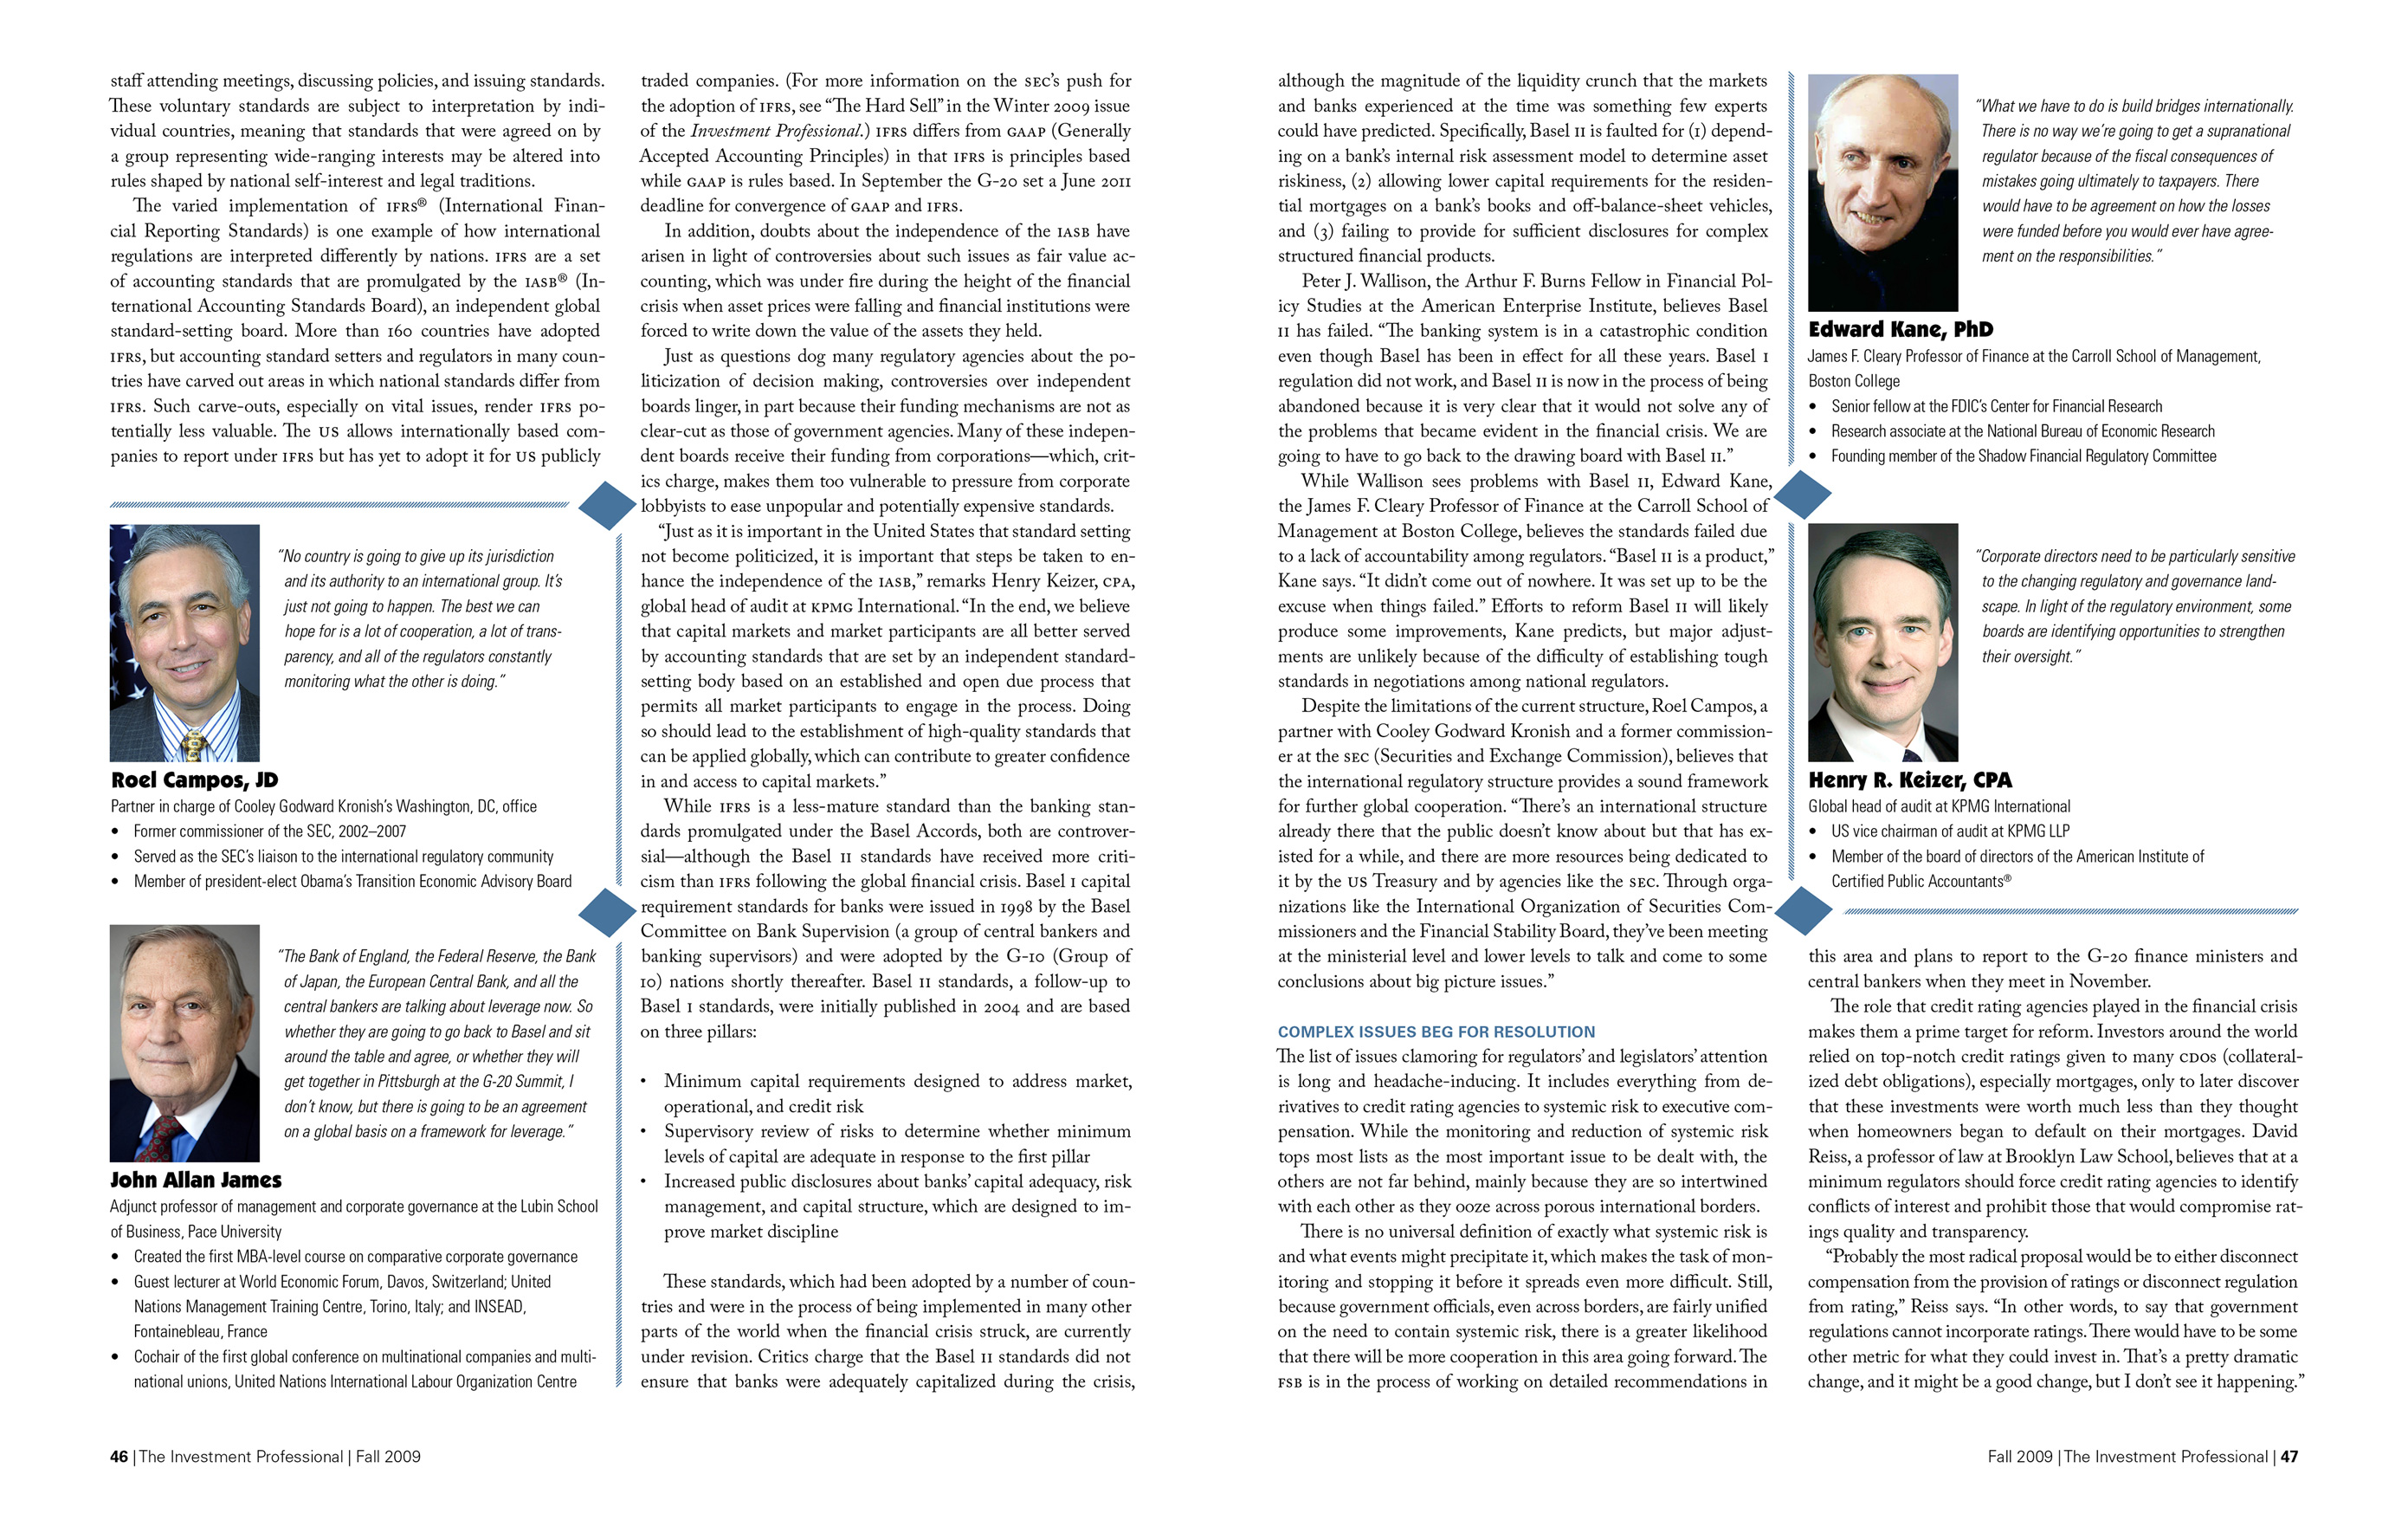 Second spread of the article titled 'Mending the Seams,' including headshots of and quotes from experts: Roel Campos of Cooley Godward Kronish; John Allan James of Lubin School of Business, Pace University; Edward Kane of Carroll School of Management, Boston College; and Henry R. Keizer of KPMG International.